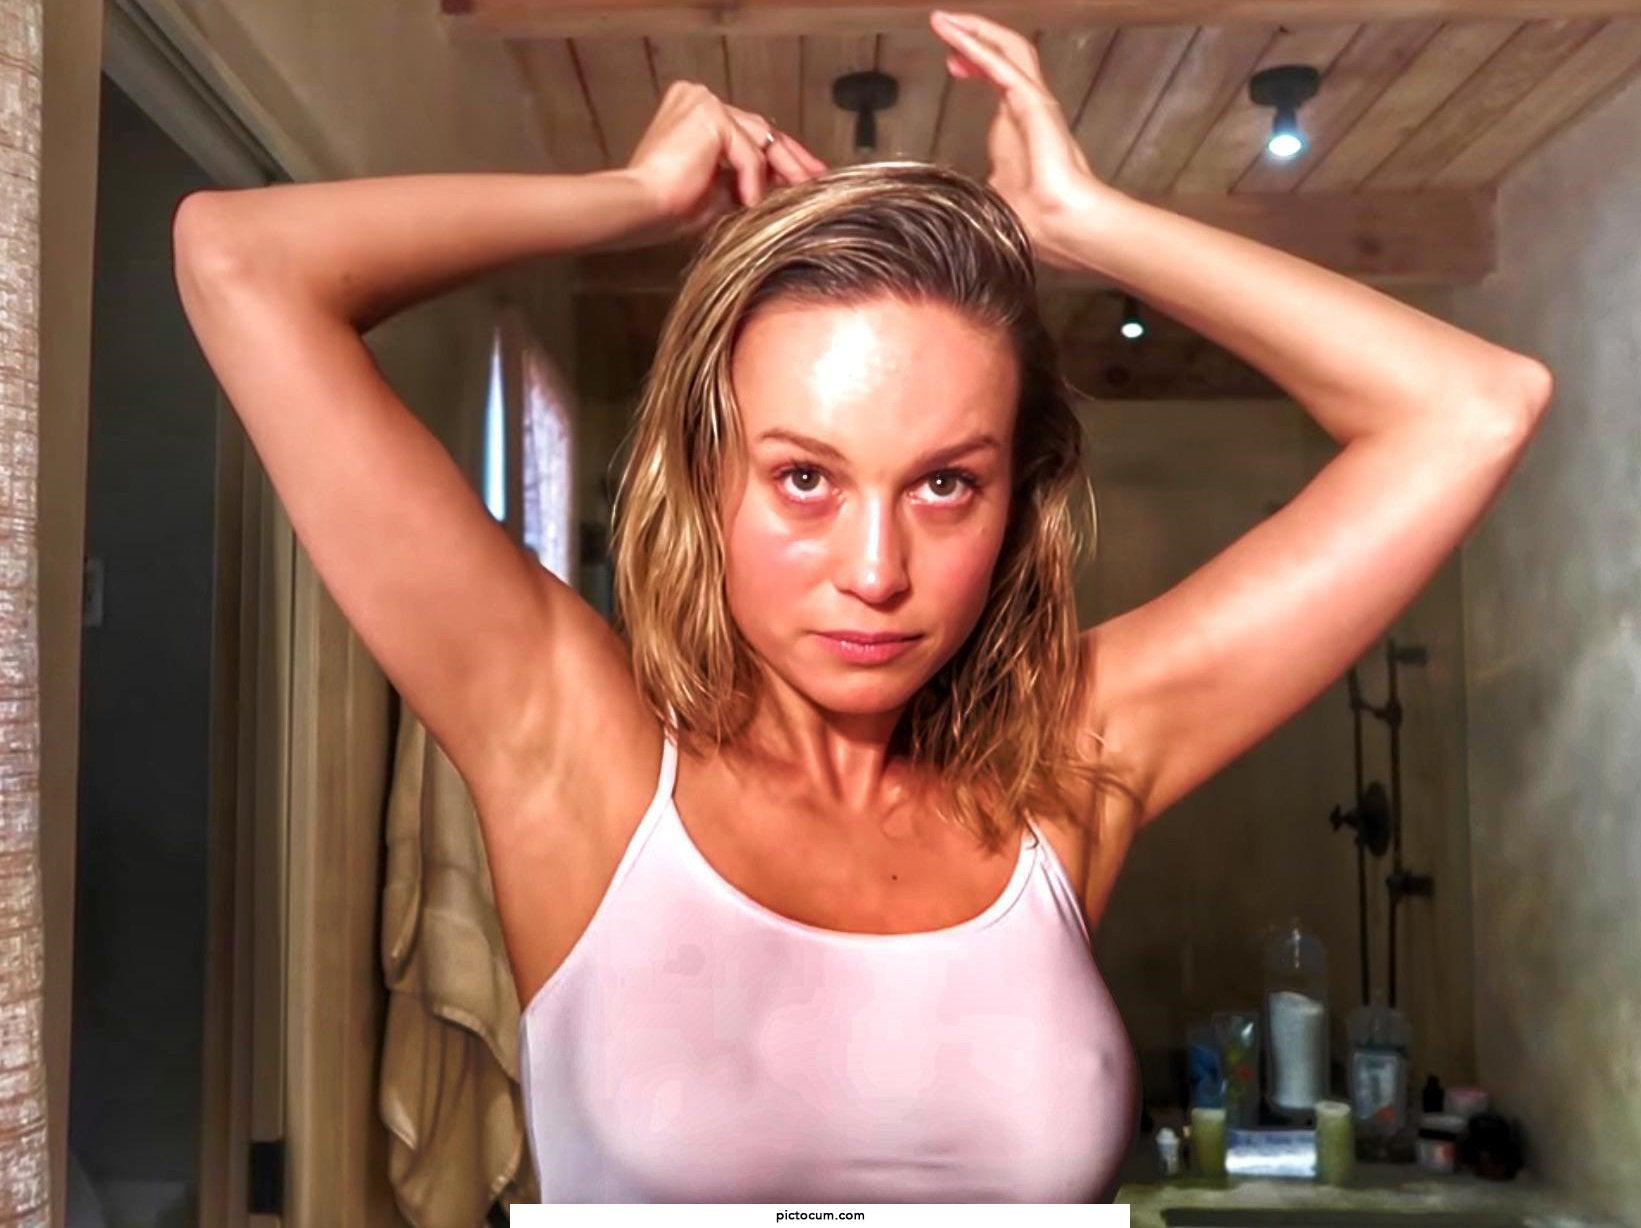 This pic of Brie Larson hits differently! So intimidating and sexy! Want to completely submit to her!